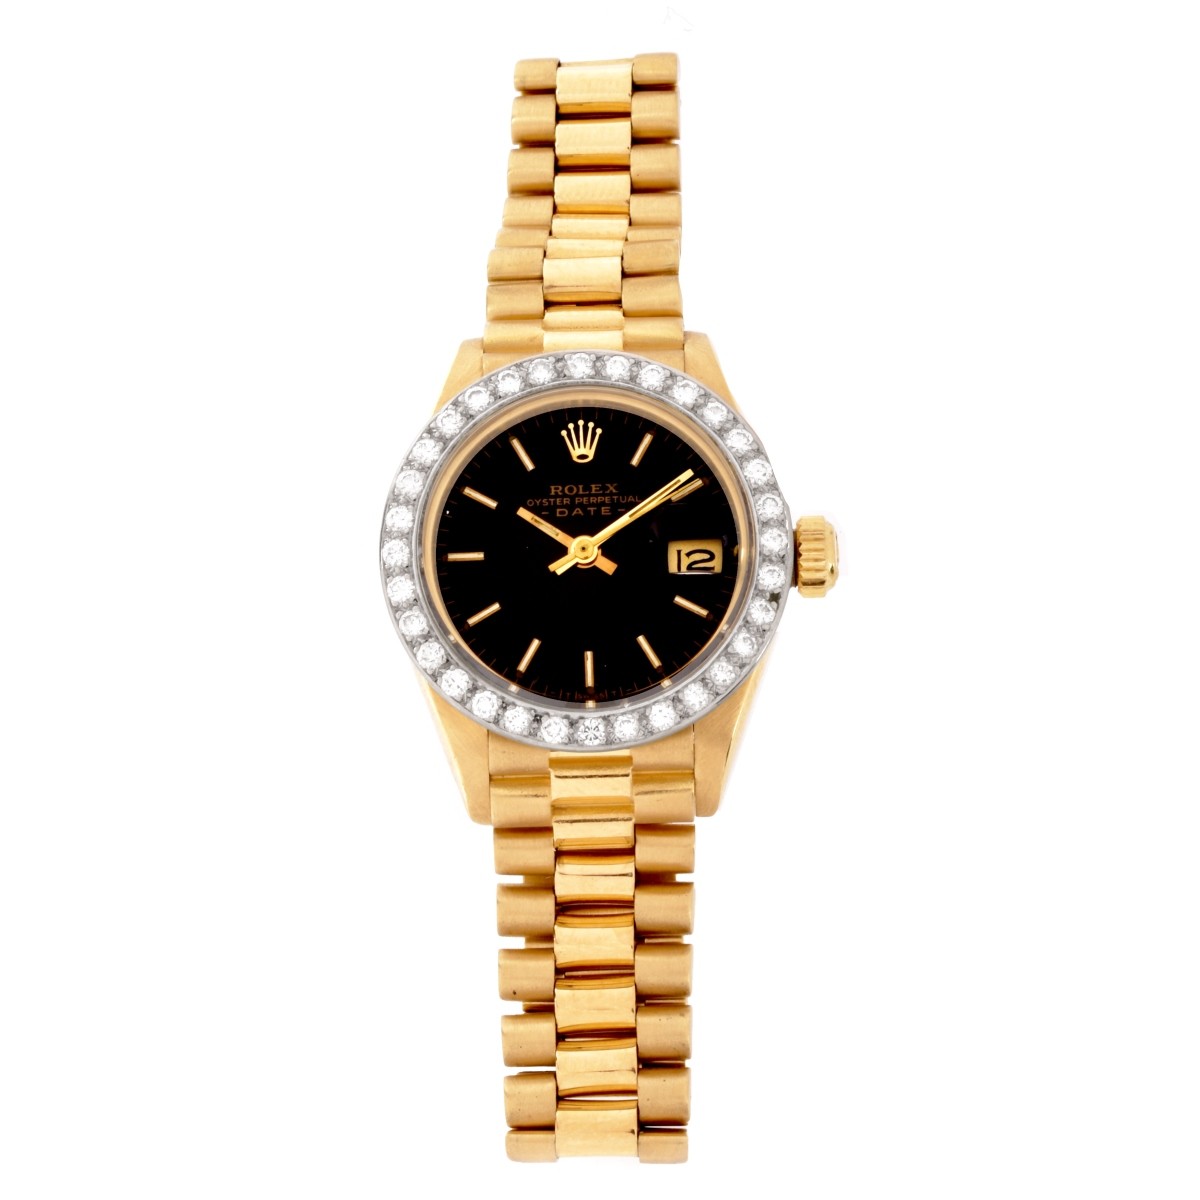 Lady's Rolex 18K Oyster Perpetual Date